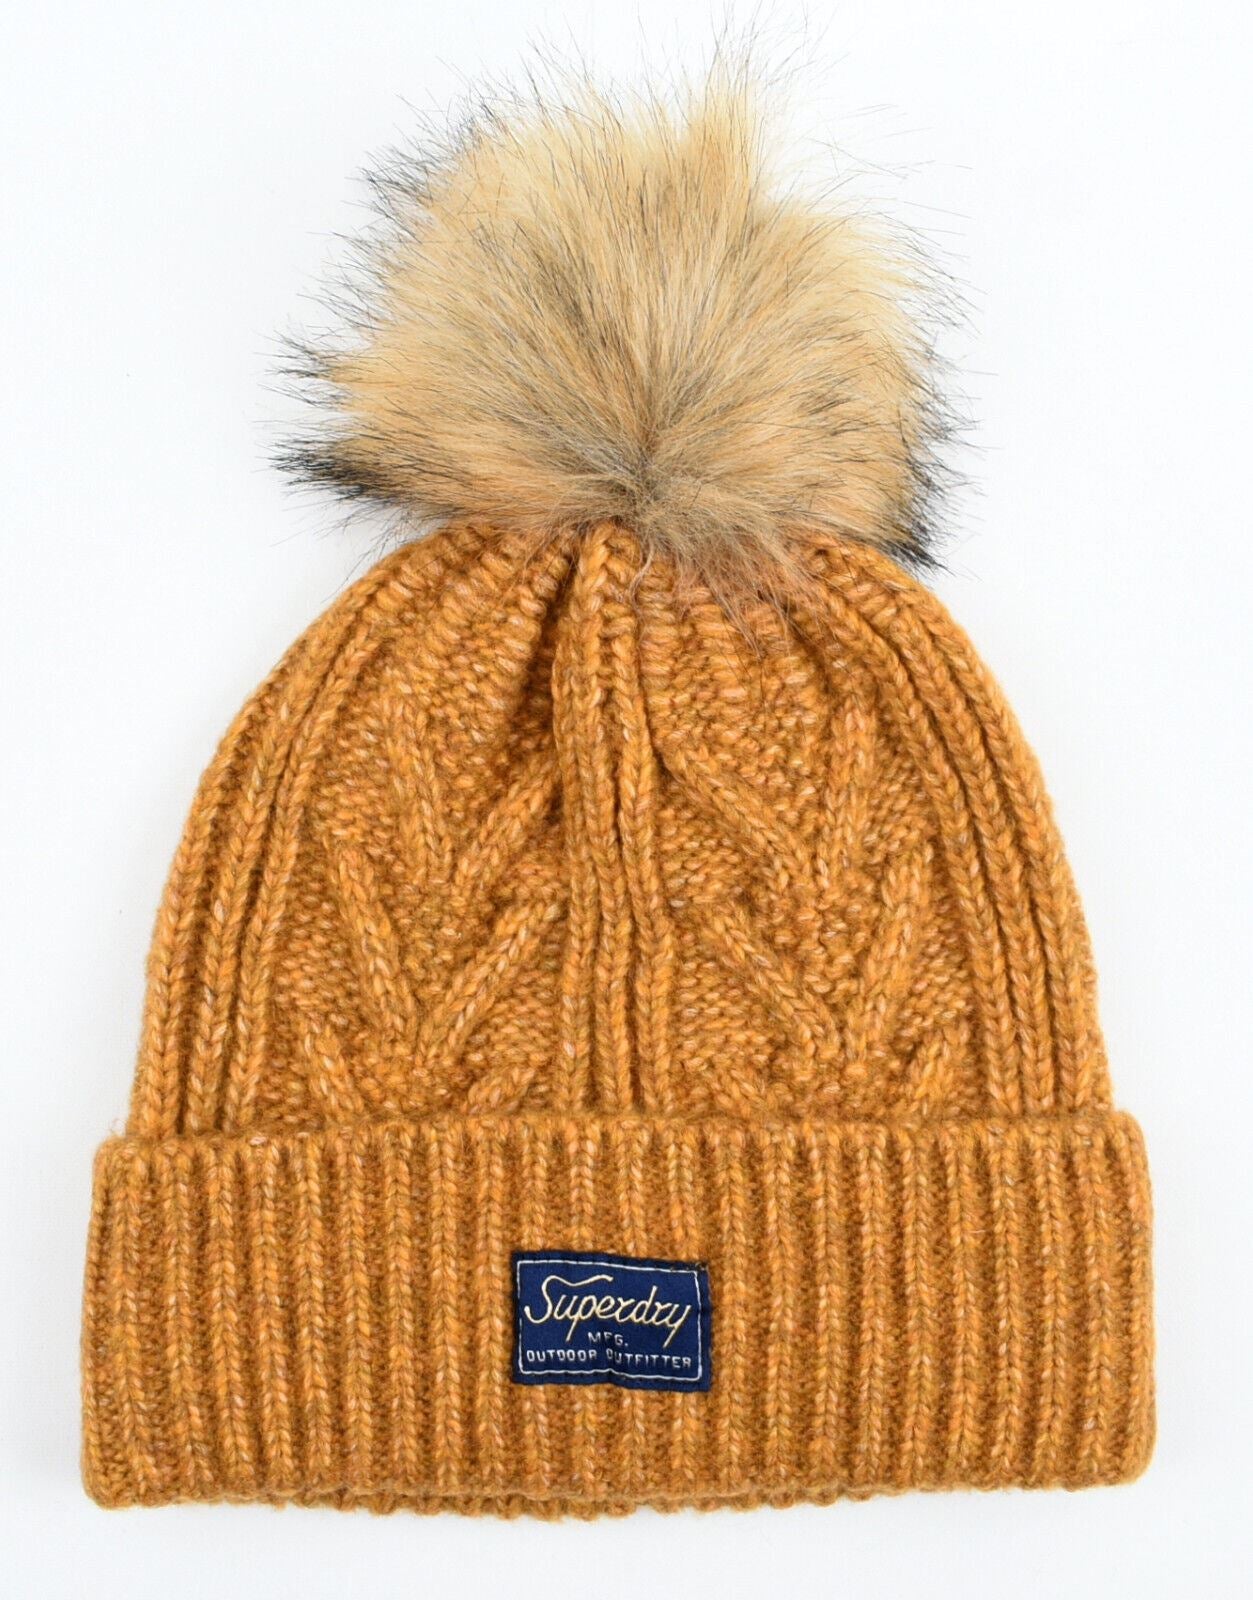 SUPERDRY Women's LUX Cable Beanie Bobble Hat, Tumeric Tan Brown, One Size